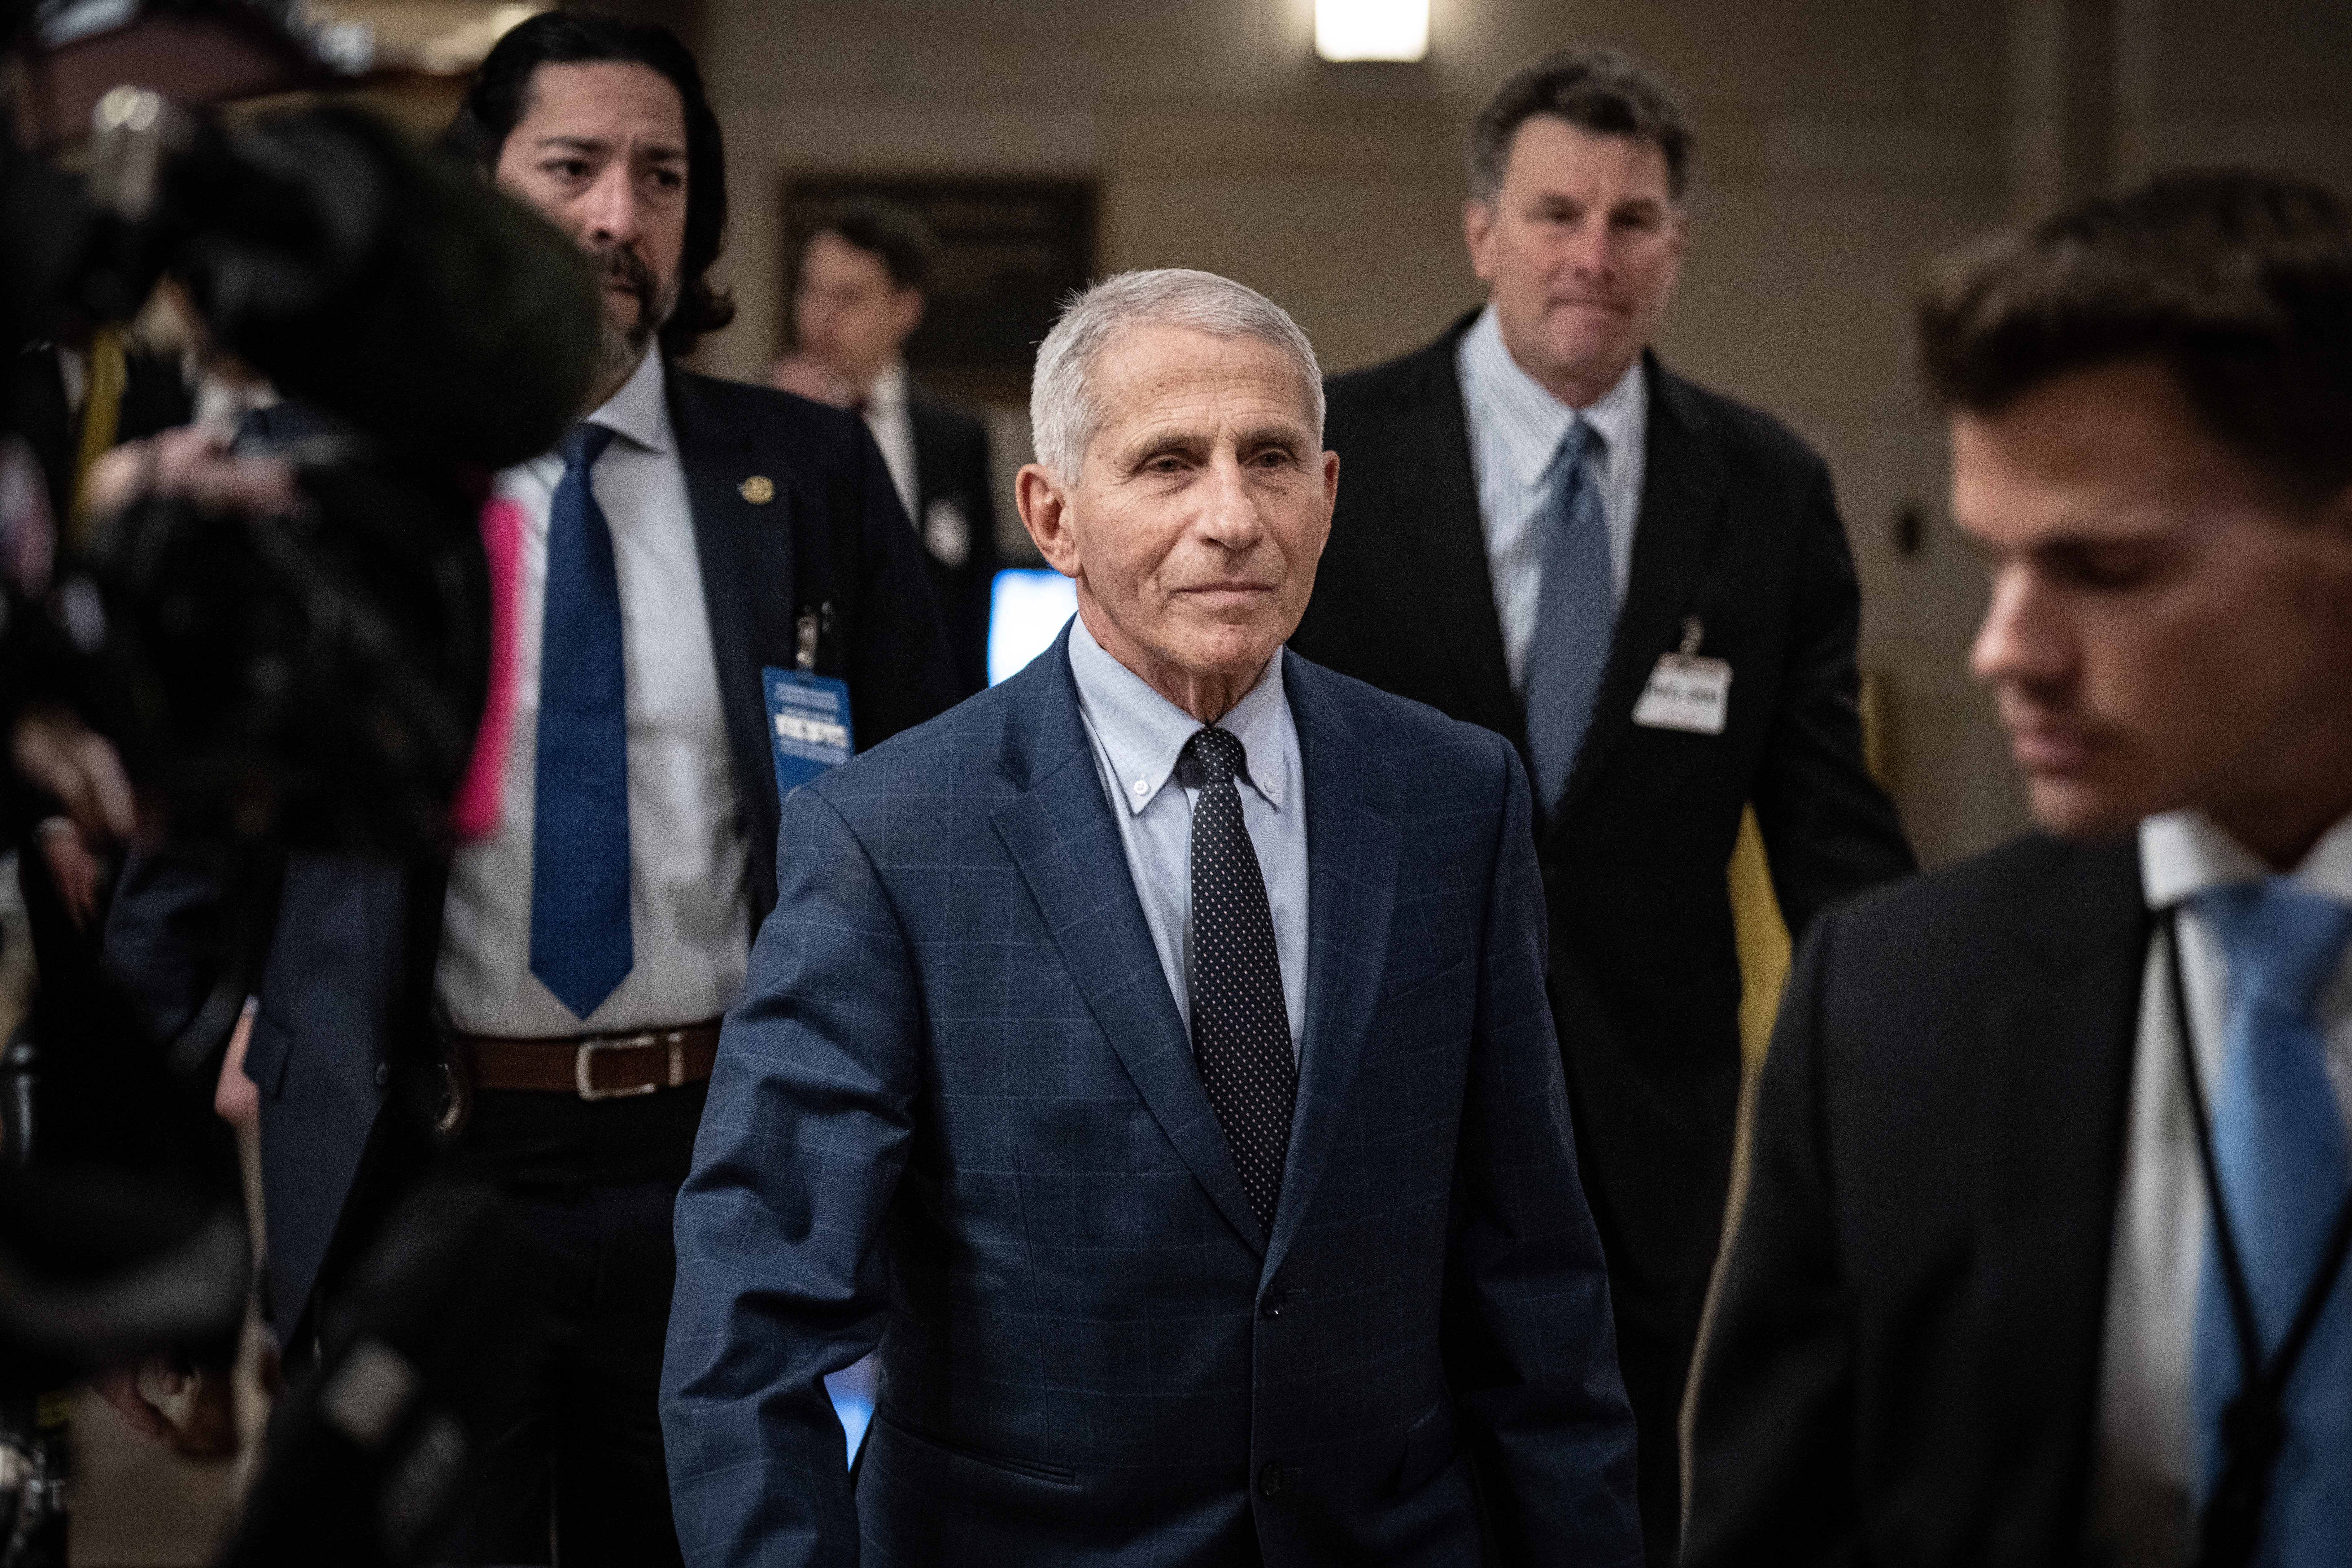 WASHINGTON, DC - JANUARY 8: Dr. Anthony Fauci, former director of the National Institute of Allergy and Infectious Diseases (NIAID), arrives for a closed-door interview with the House Select Subcommittee on the Coronavirus Pandemic at the U.S. Capitol January 8, 2024 in Washington, DC. Fauci is expected to face questioning about the origins of COVID-19, vaccine mandates and how to prevent future pandemics. (Photo by Drew Angerer/Getty Images) *** BESTPIX ***